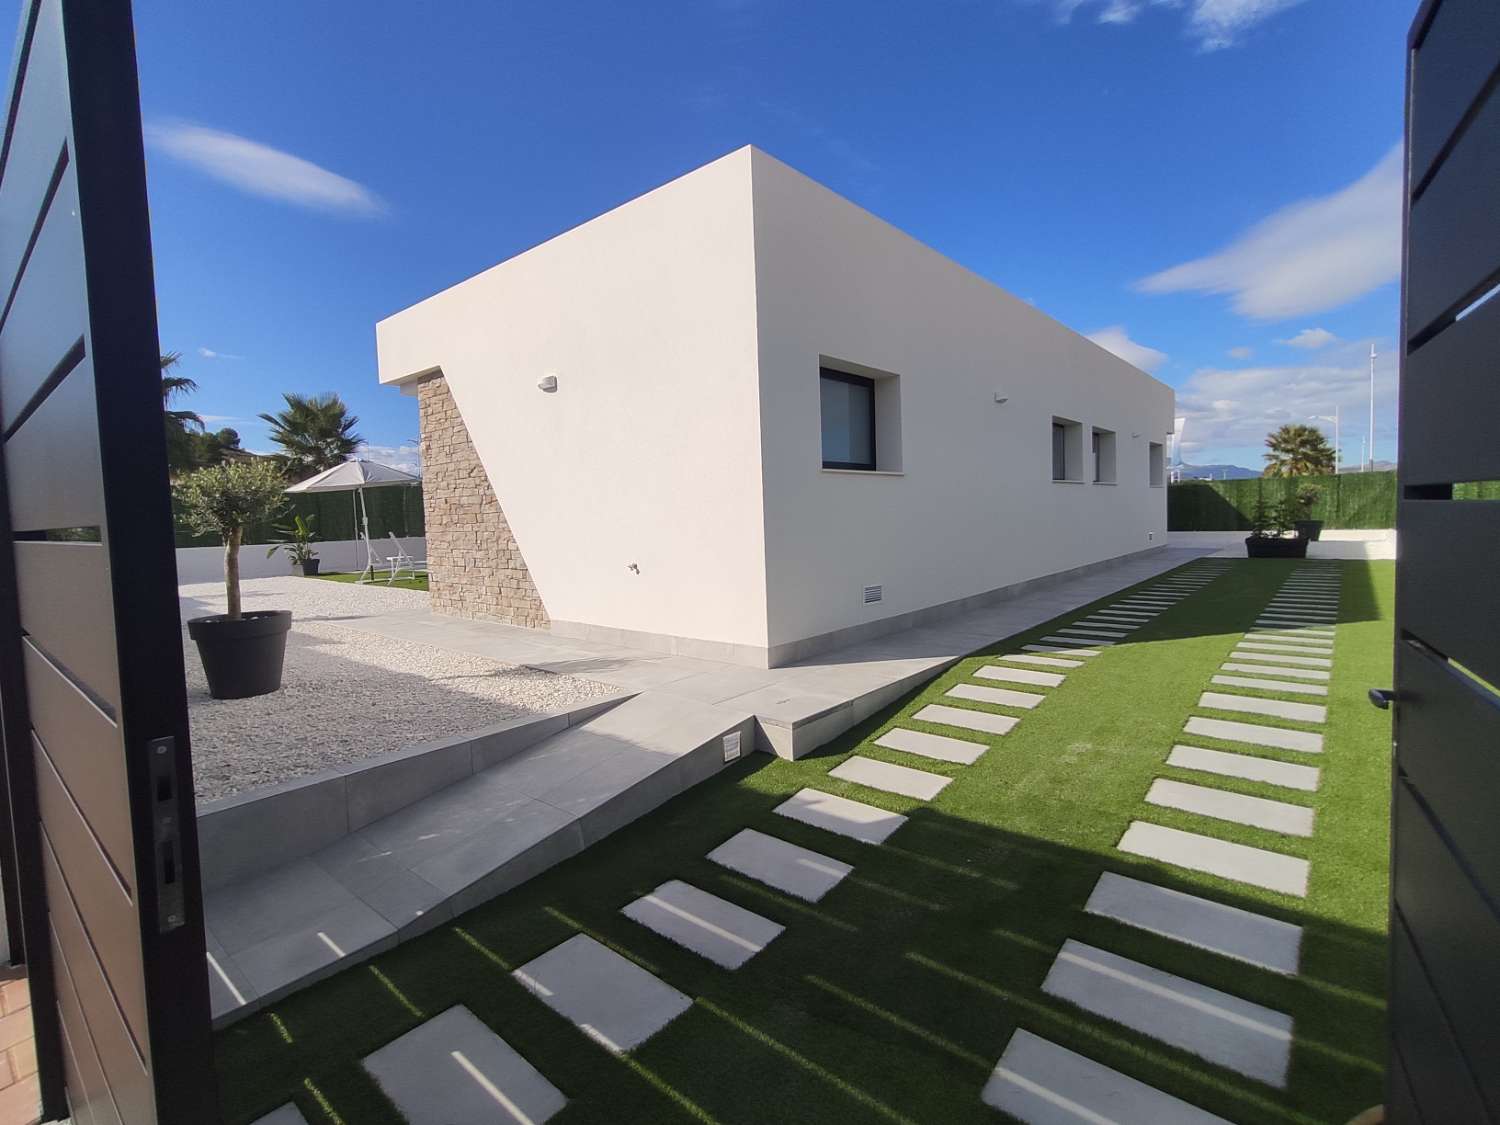 Detached villa 1h30 away from the coast, Murcia